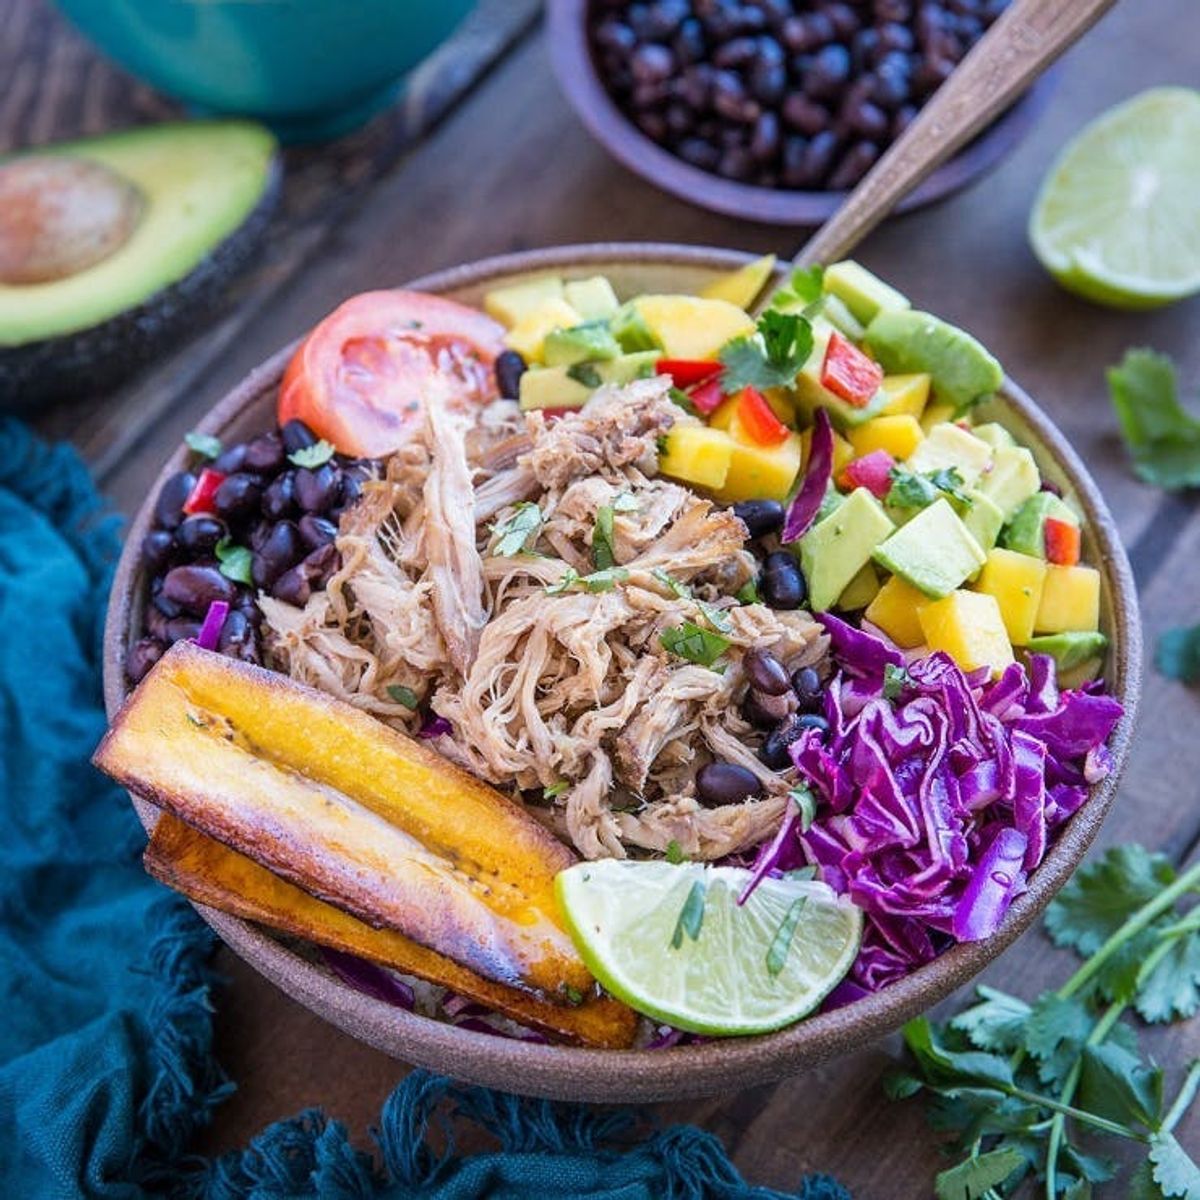 15 Slow-Cooker Pulled Pork Recipes for Cozy Sundays